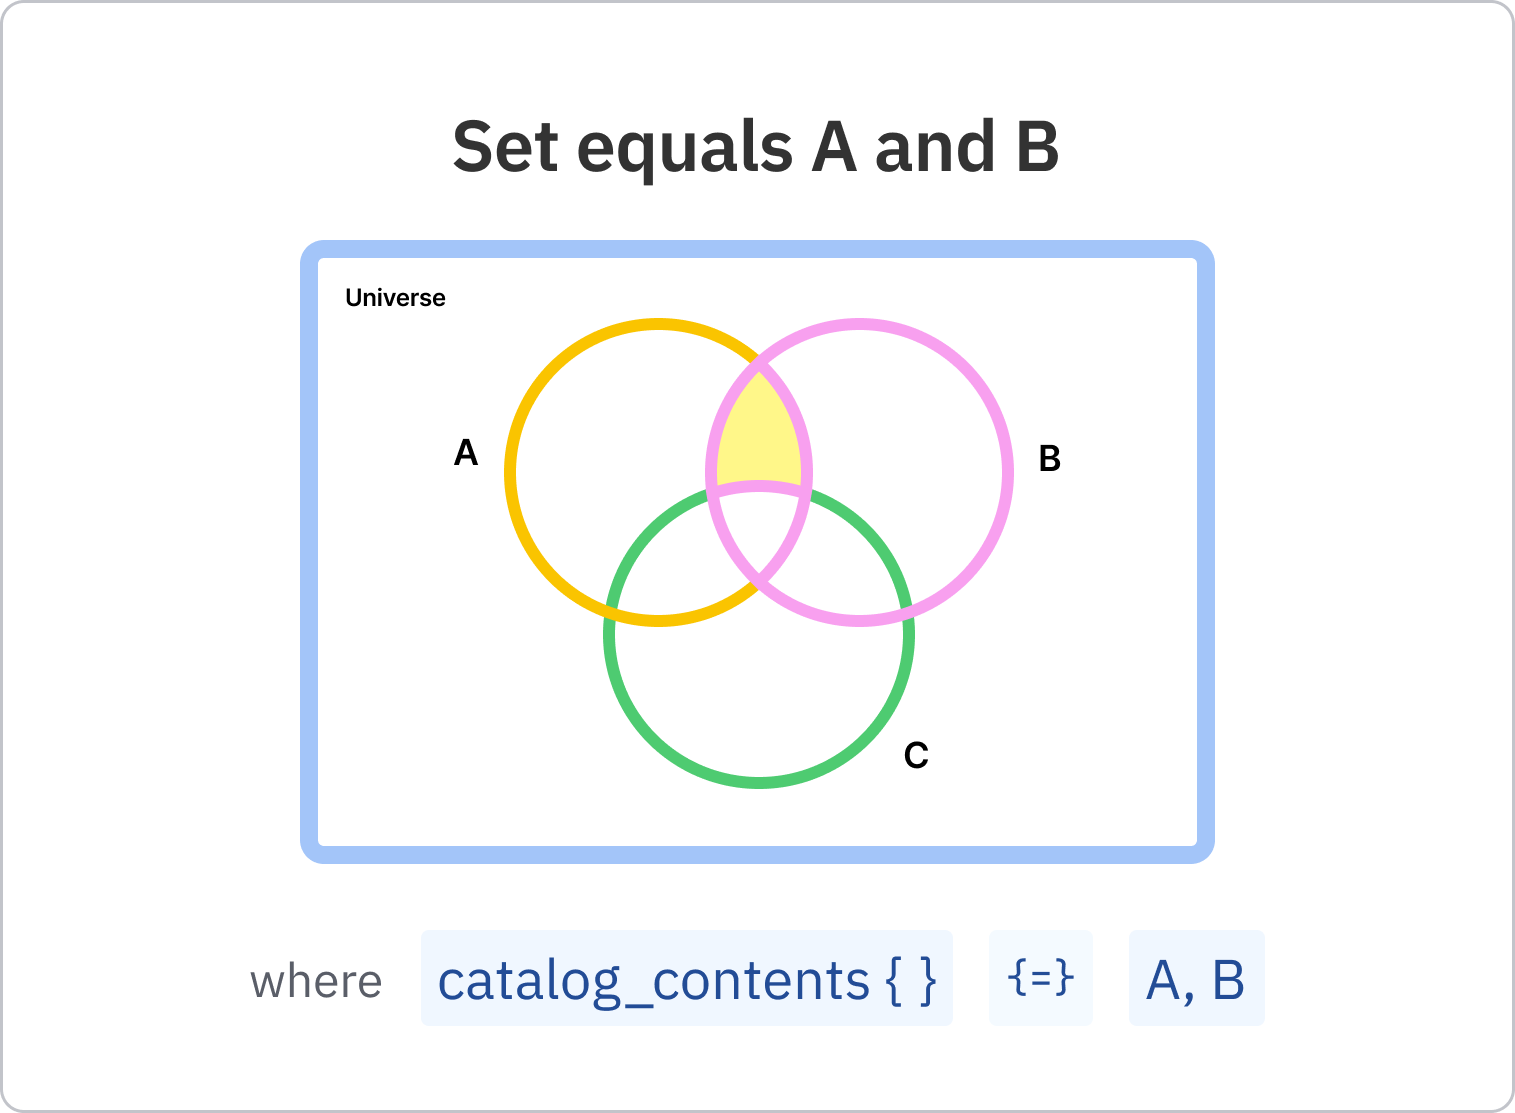 18_-_Set_equals_A_and_B.png